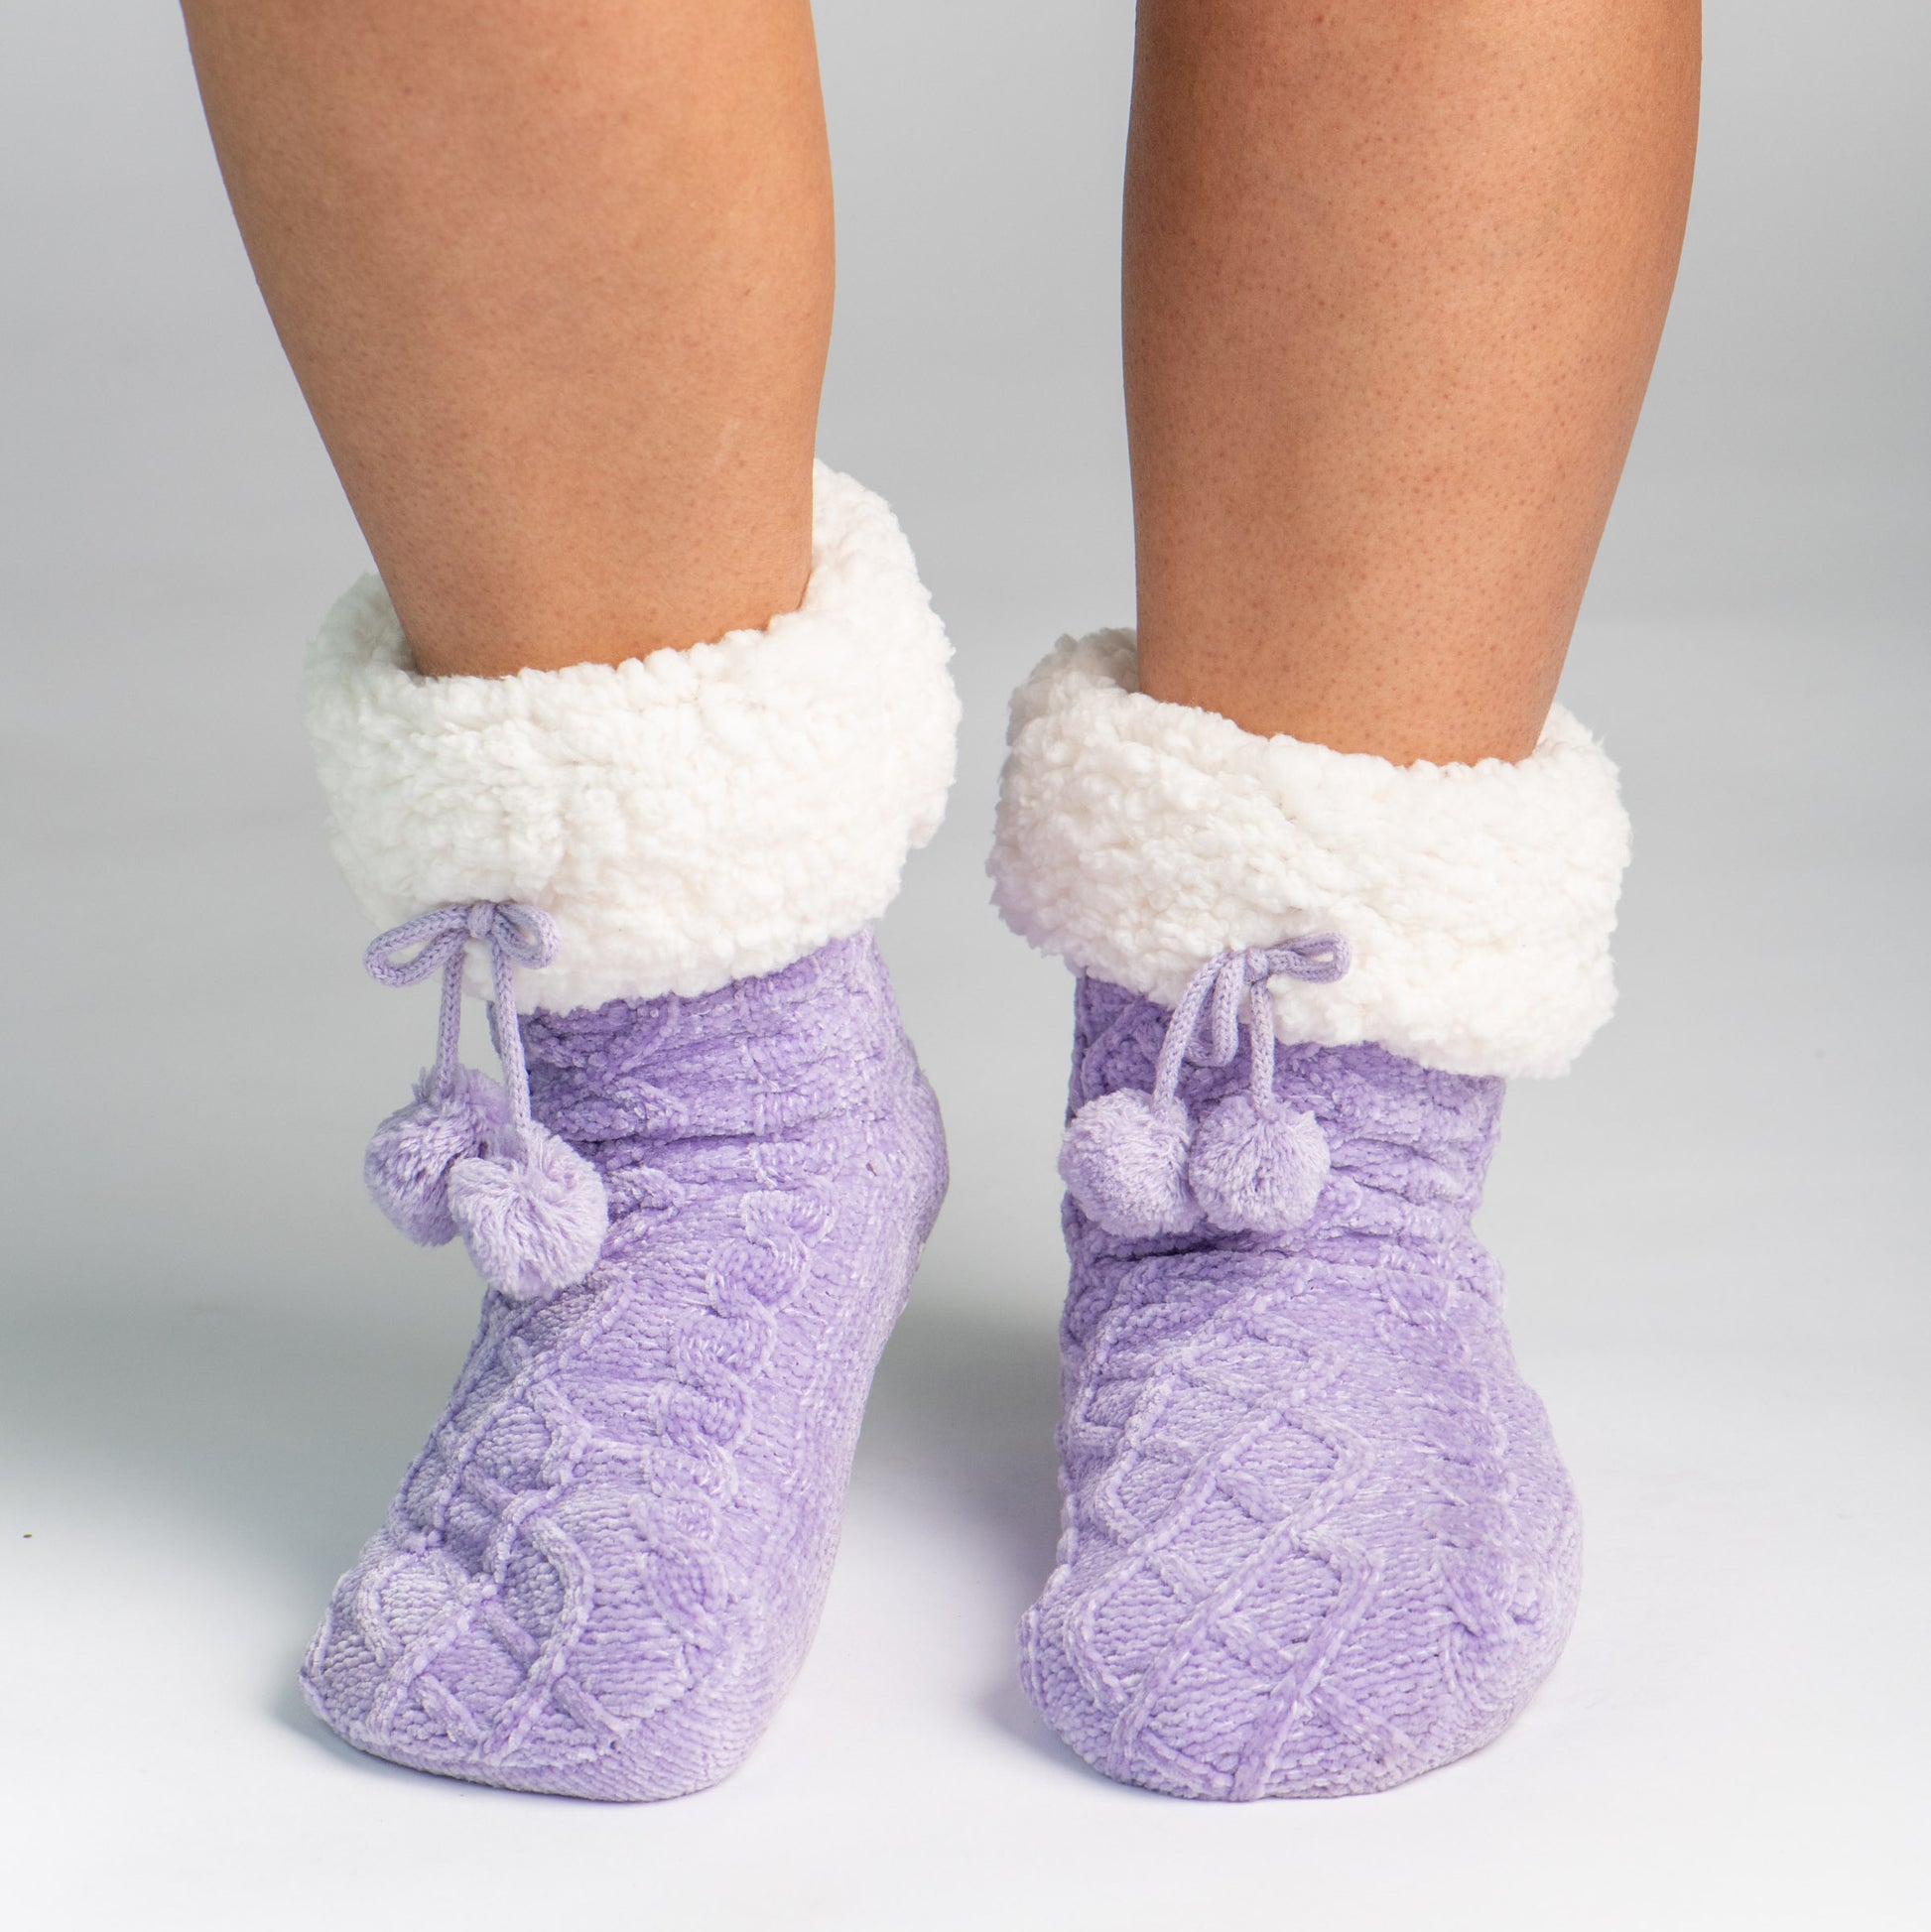 Found: The coziest winter socks for your cold winter feet — and